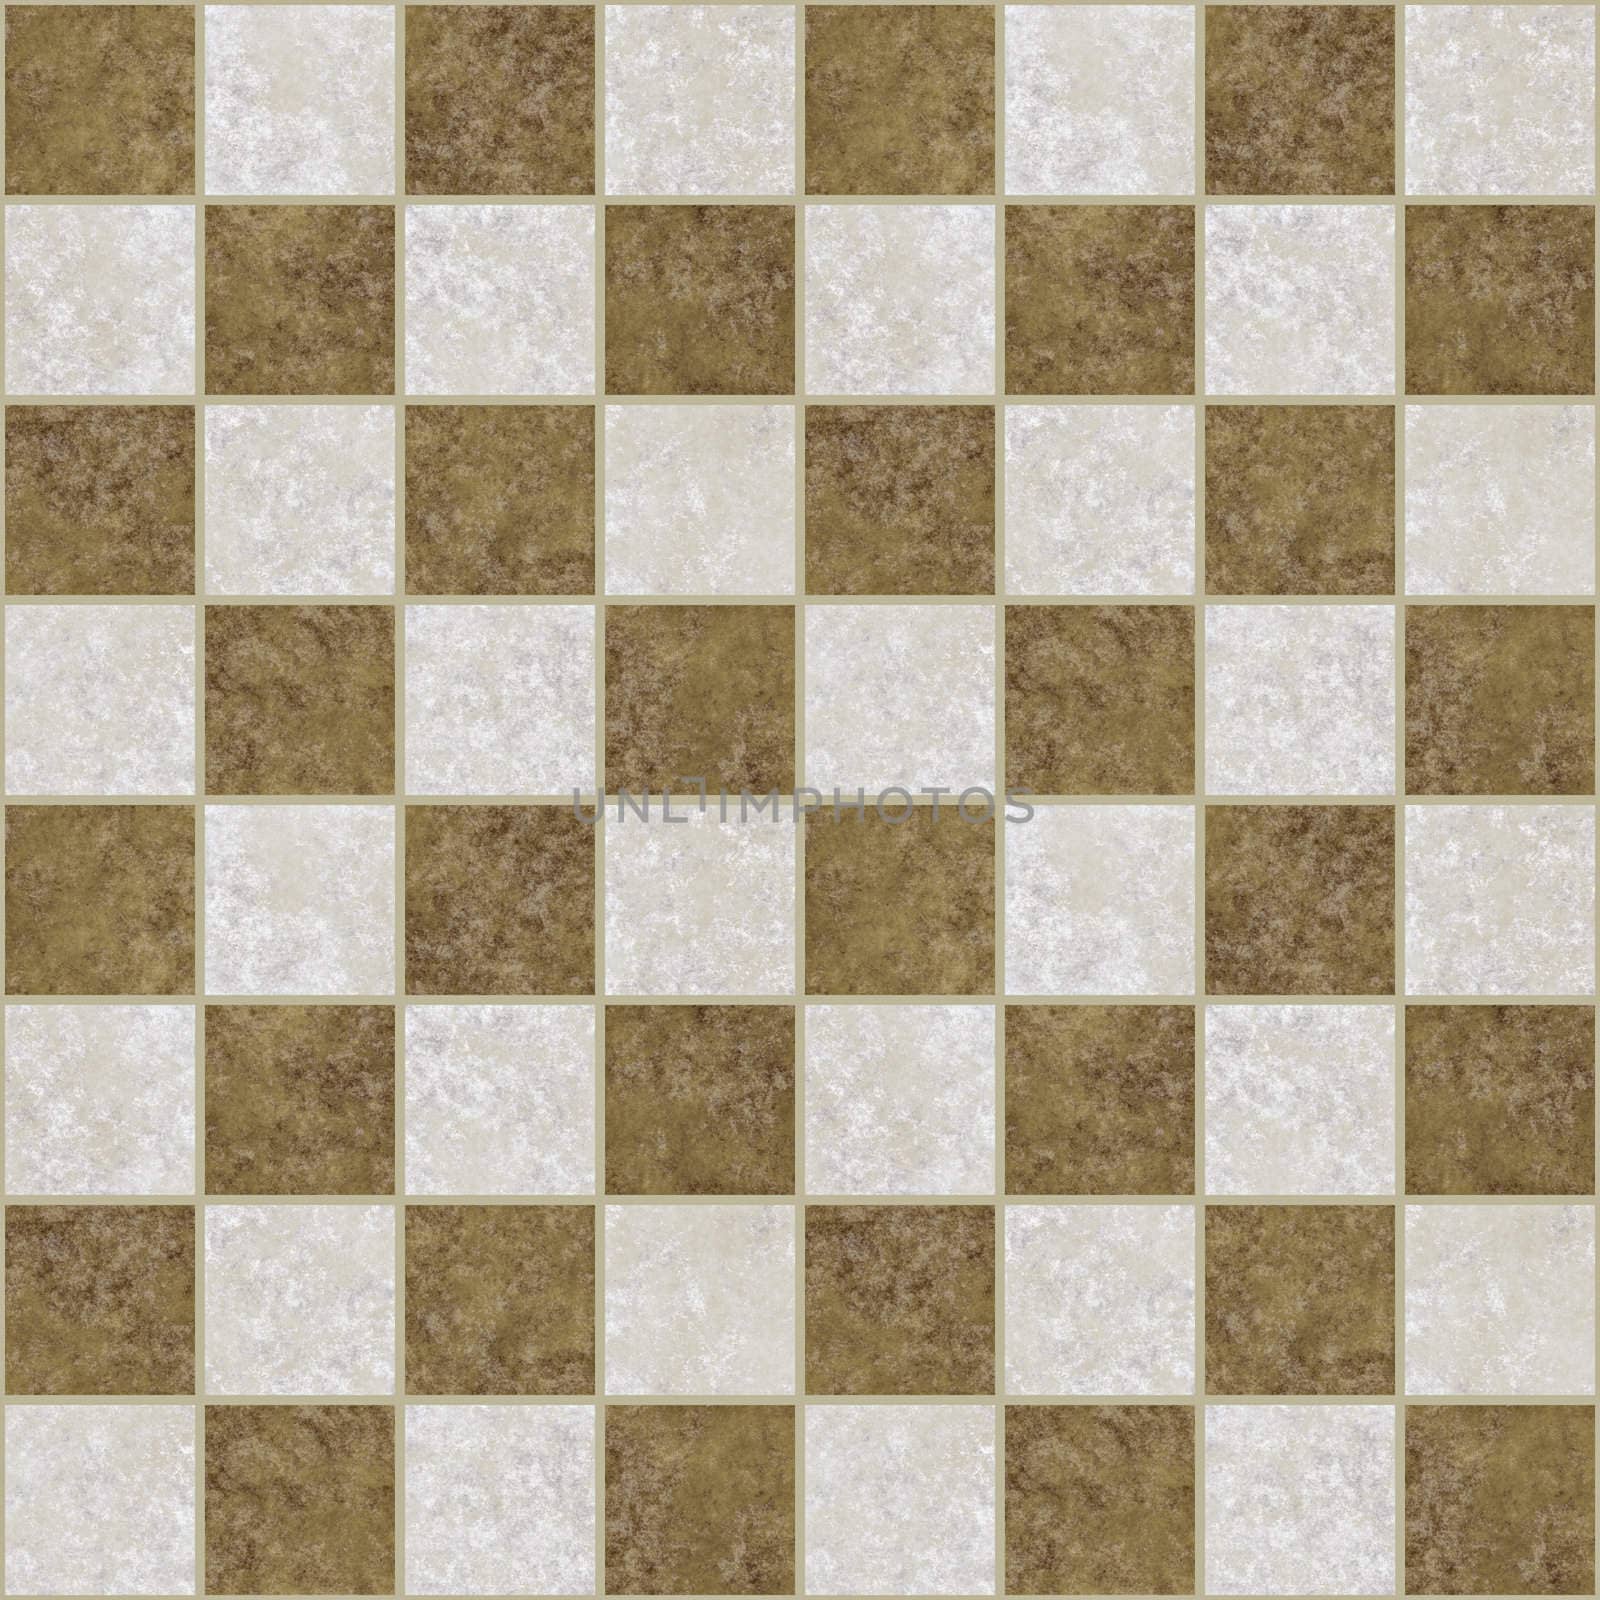 image of a checkered marble floor pattern 